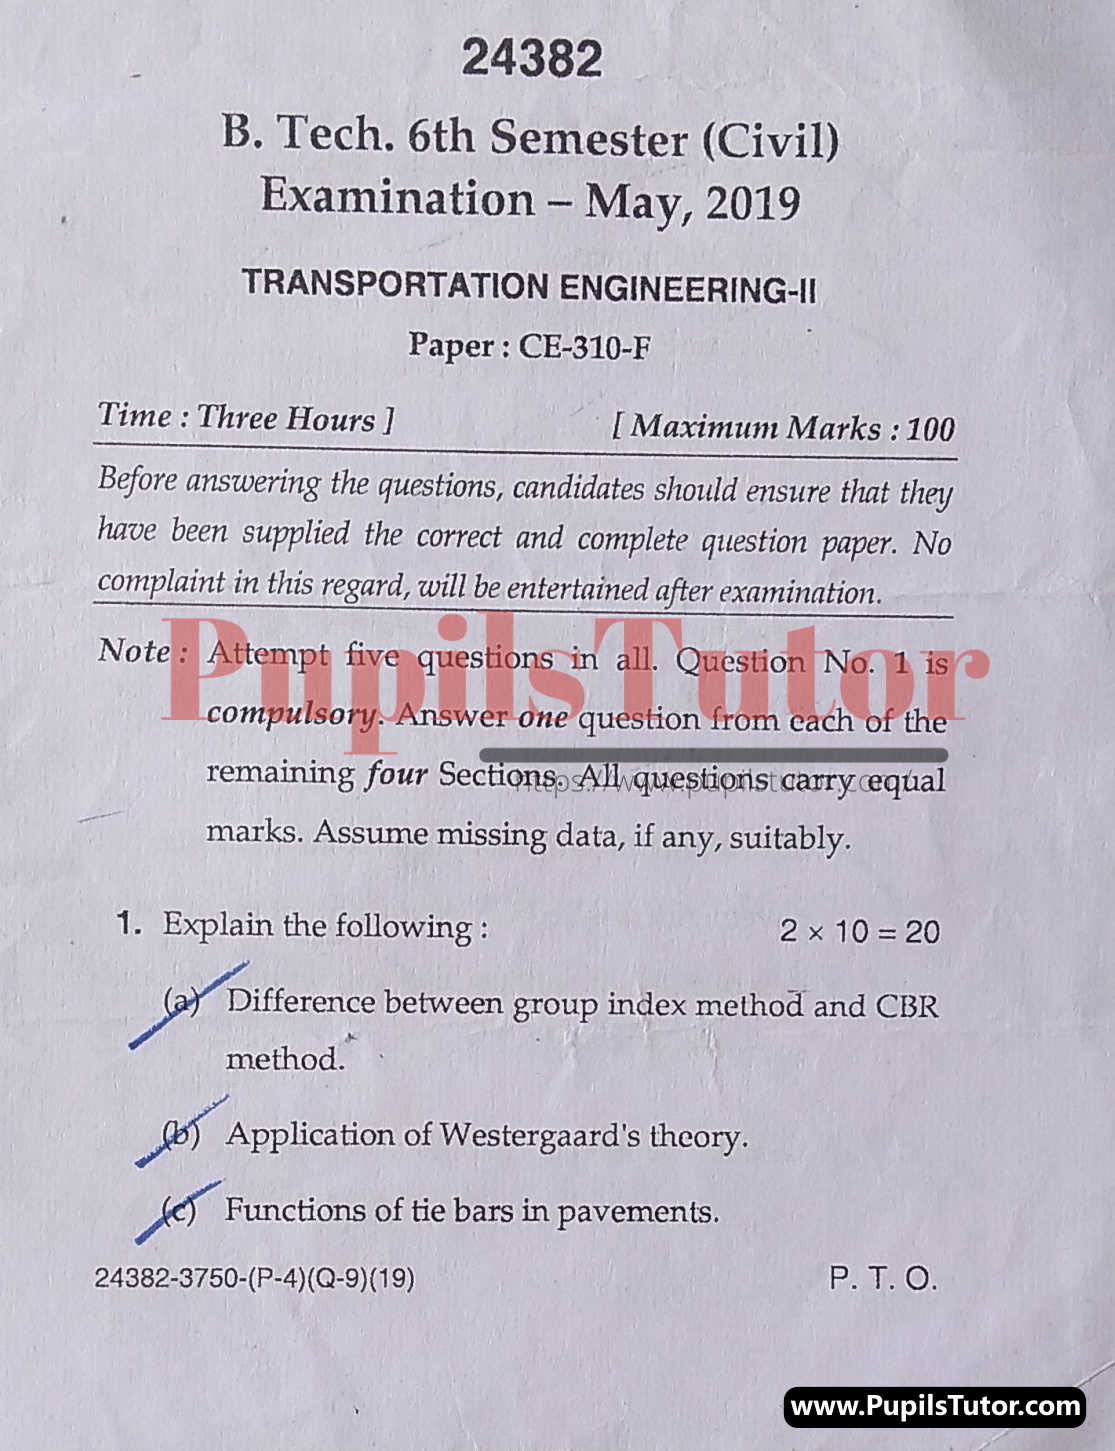 MDU (Maharshi Dayanand University, Rohtak Haryana) Btech Regular Exam Sixth Semester Previous Year Transportation Engineering Question Paper For May, 2019 Exam (Question Paper Page 1) - pupilstutor.com